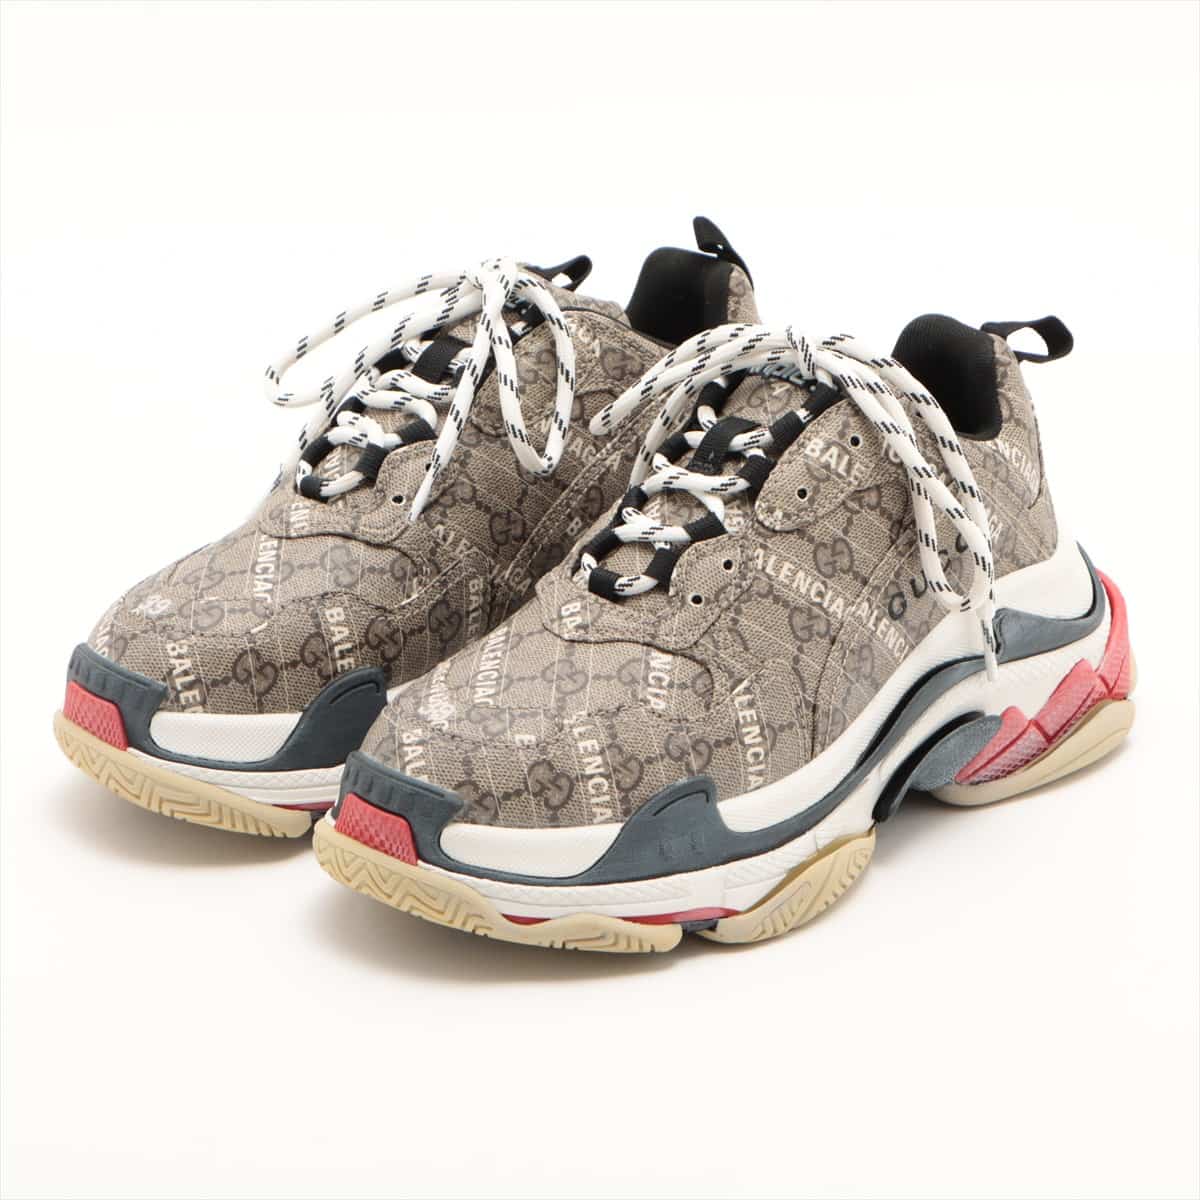 Gucci x Balenciaga Triple s 21 years Fabric Sneakers 26cm Men's Beige 681066 GG Supreme The hackers projects